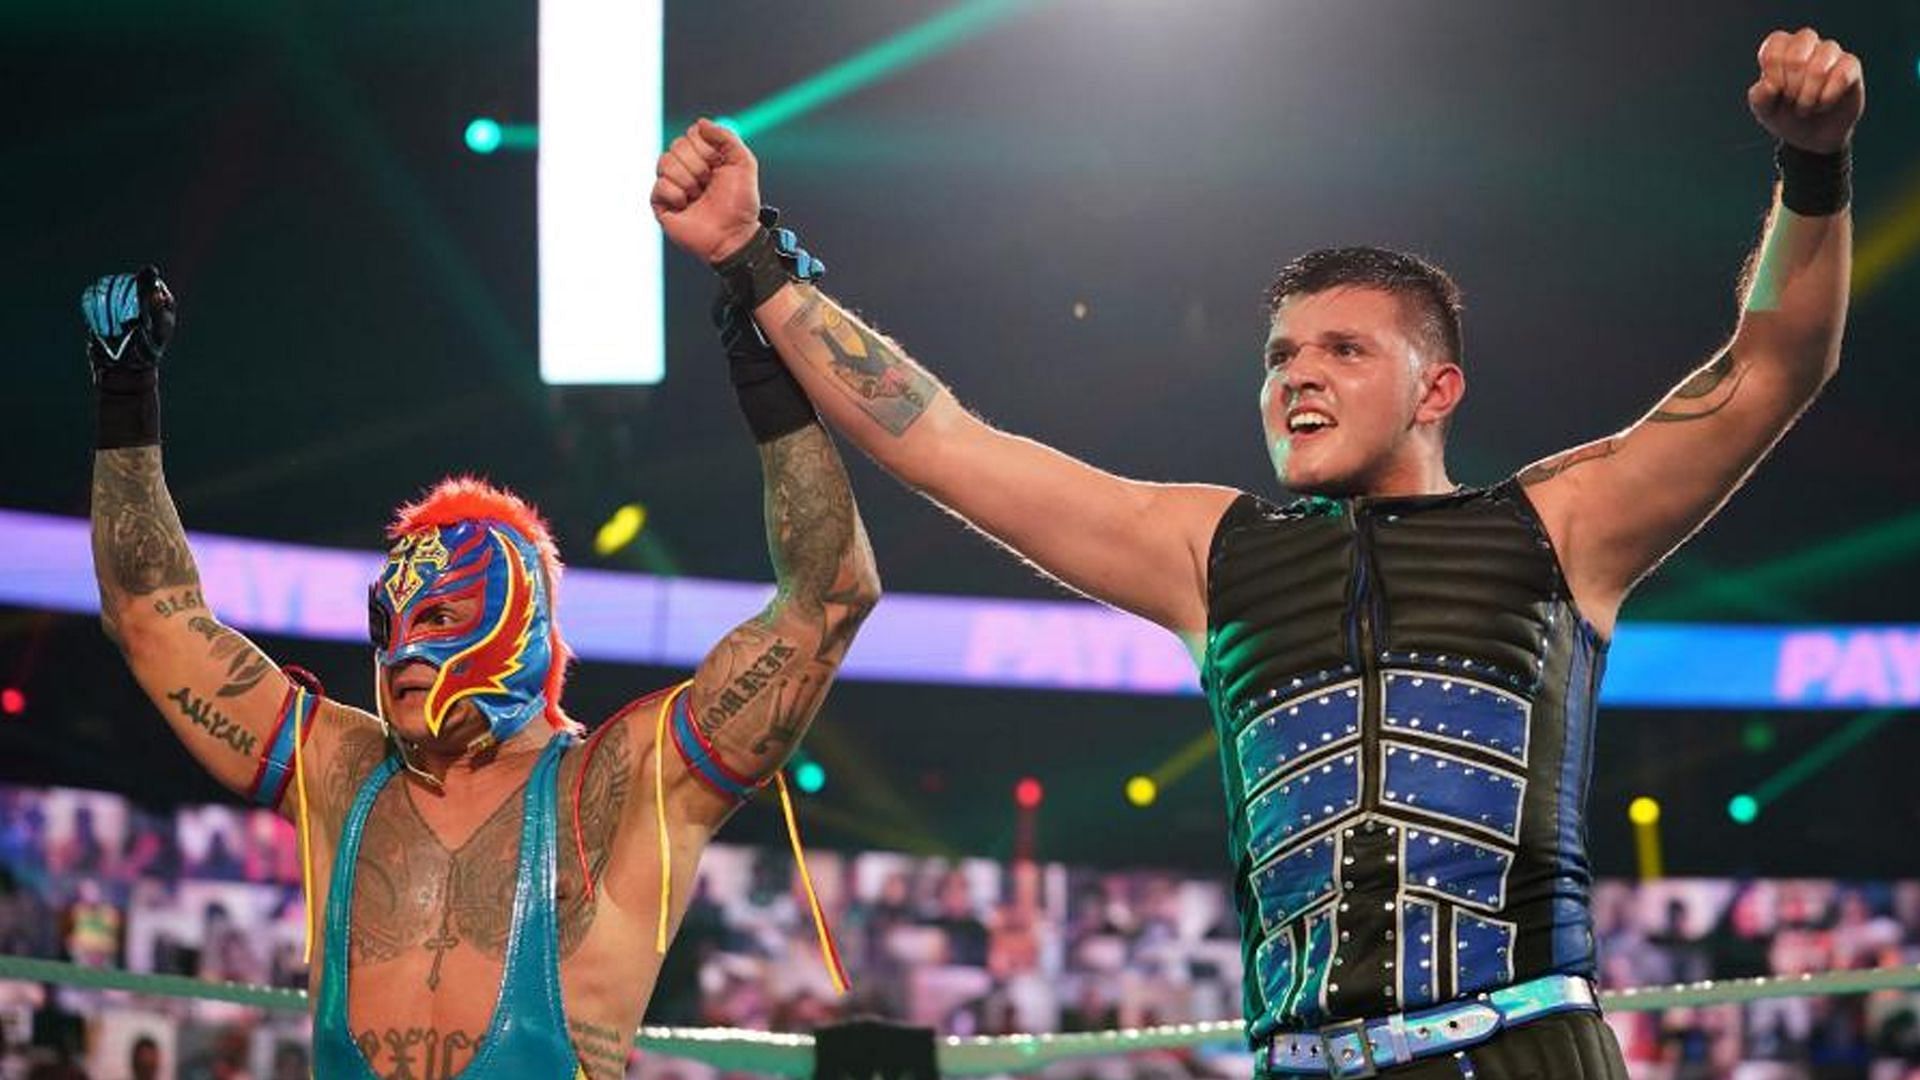 Dominik Mysterio is a former WWE SmackDown Tag Team Champion